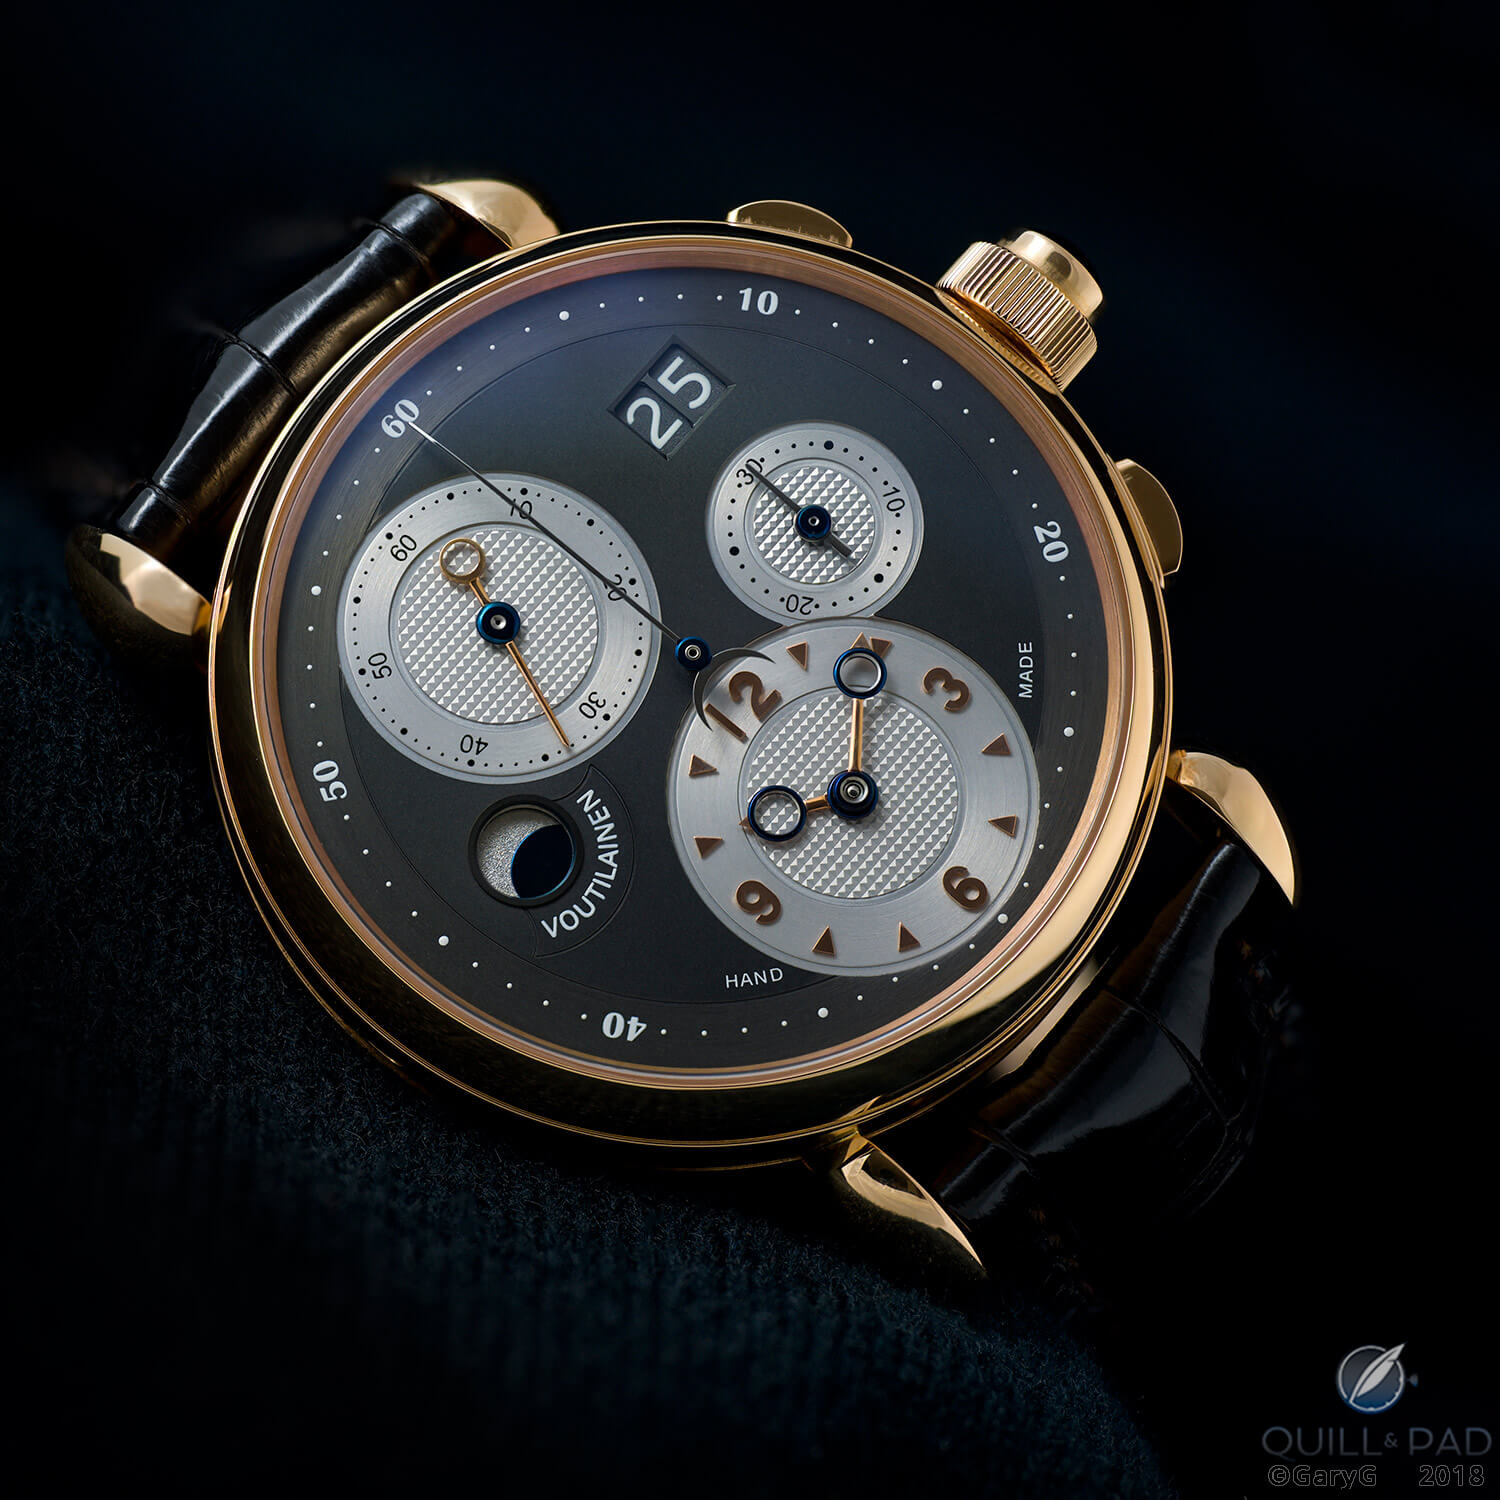 Not easy, but worth it: Hasselblad X1D shot of the author’s Voutilainen chronograph